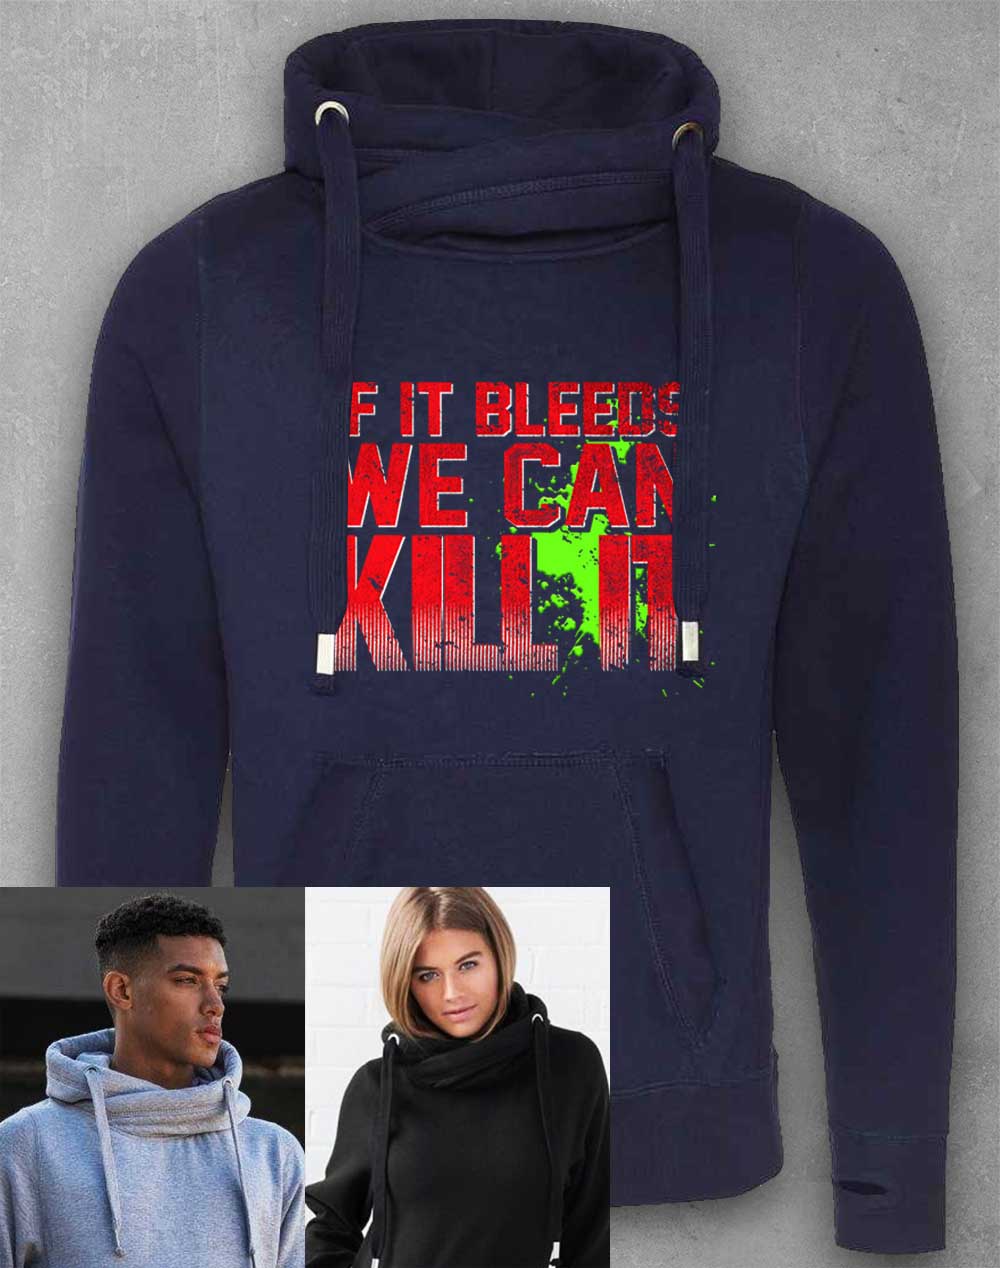 Oxford Navy - If It Bleeds We Can Kill It Chunky Cross Neck Hoodie